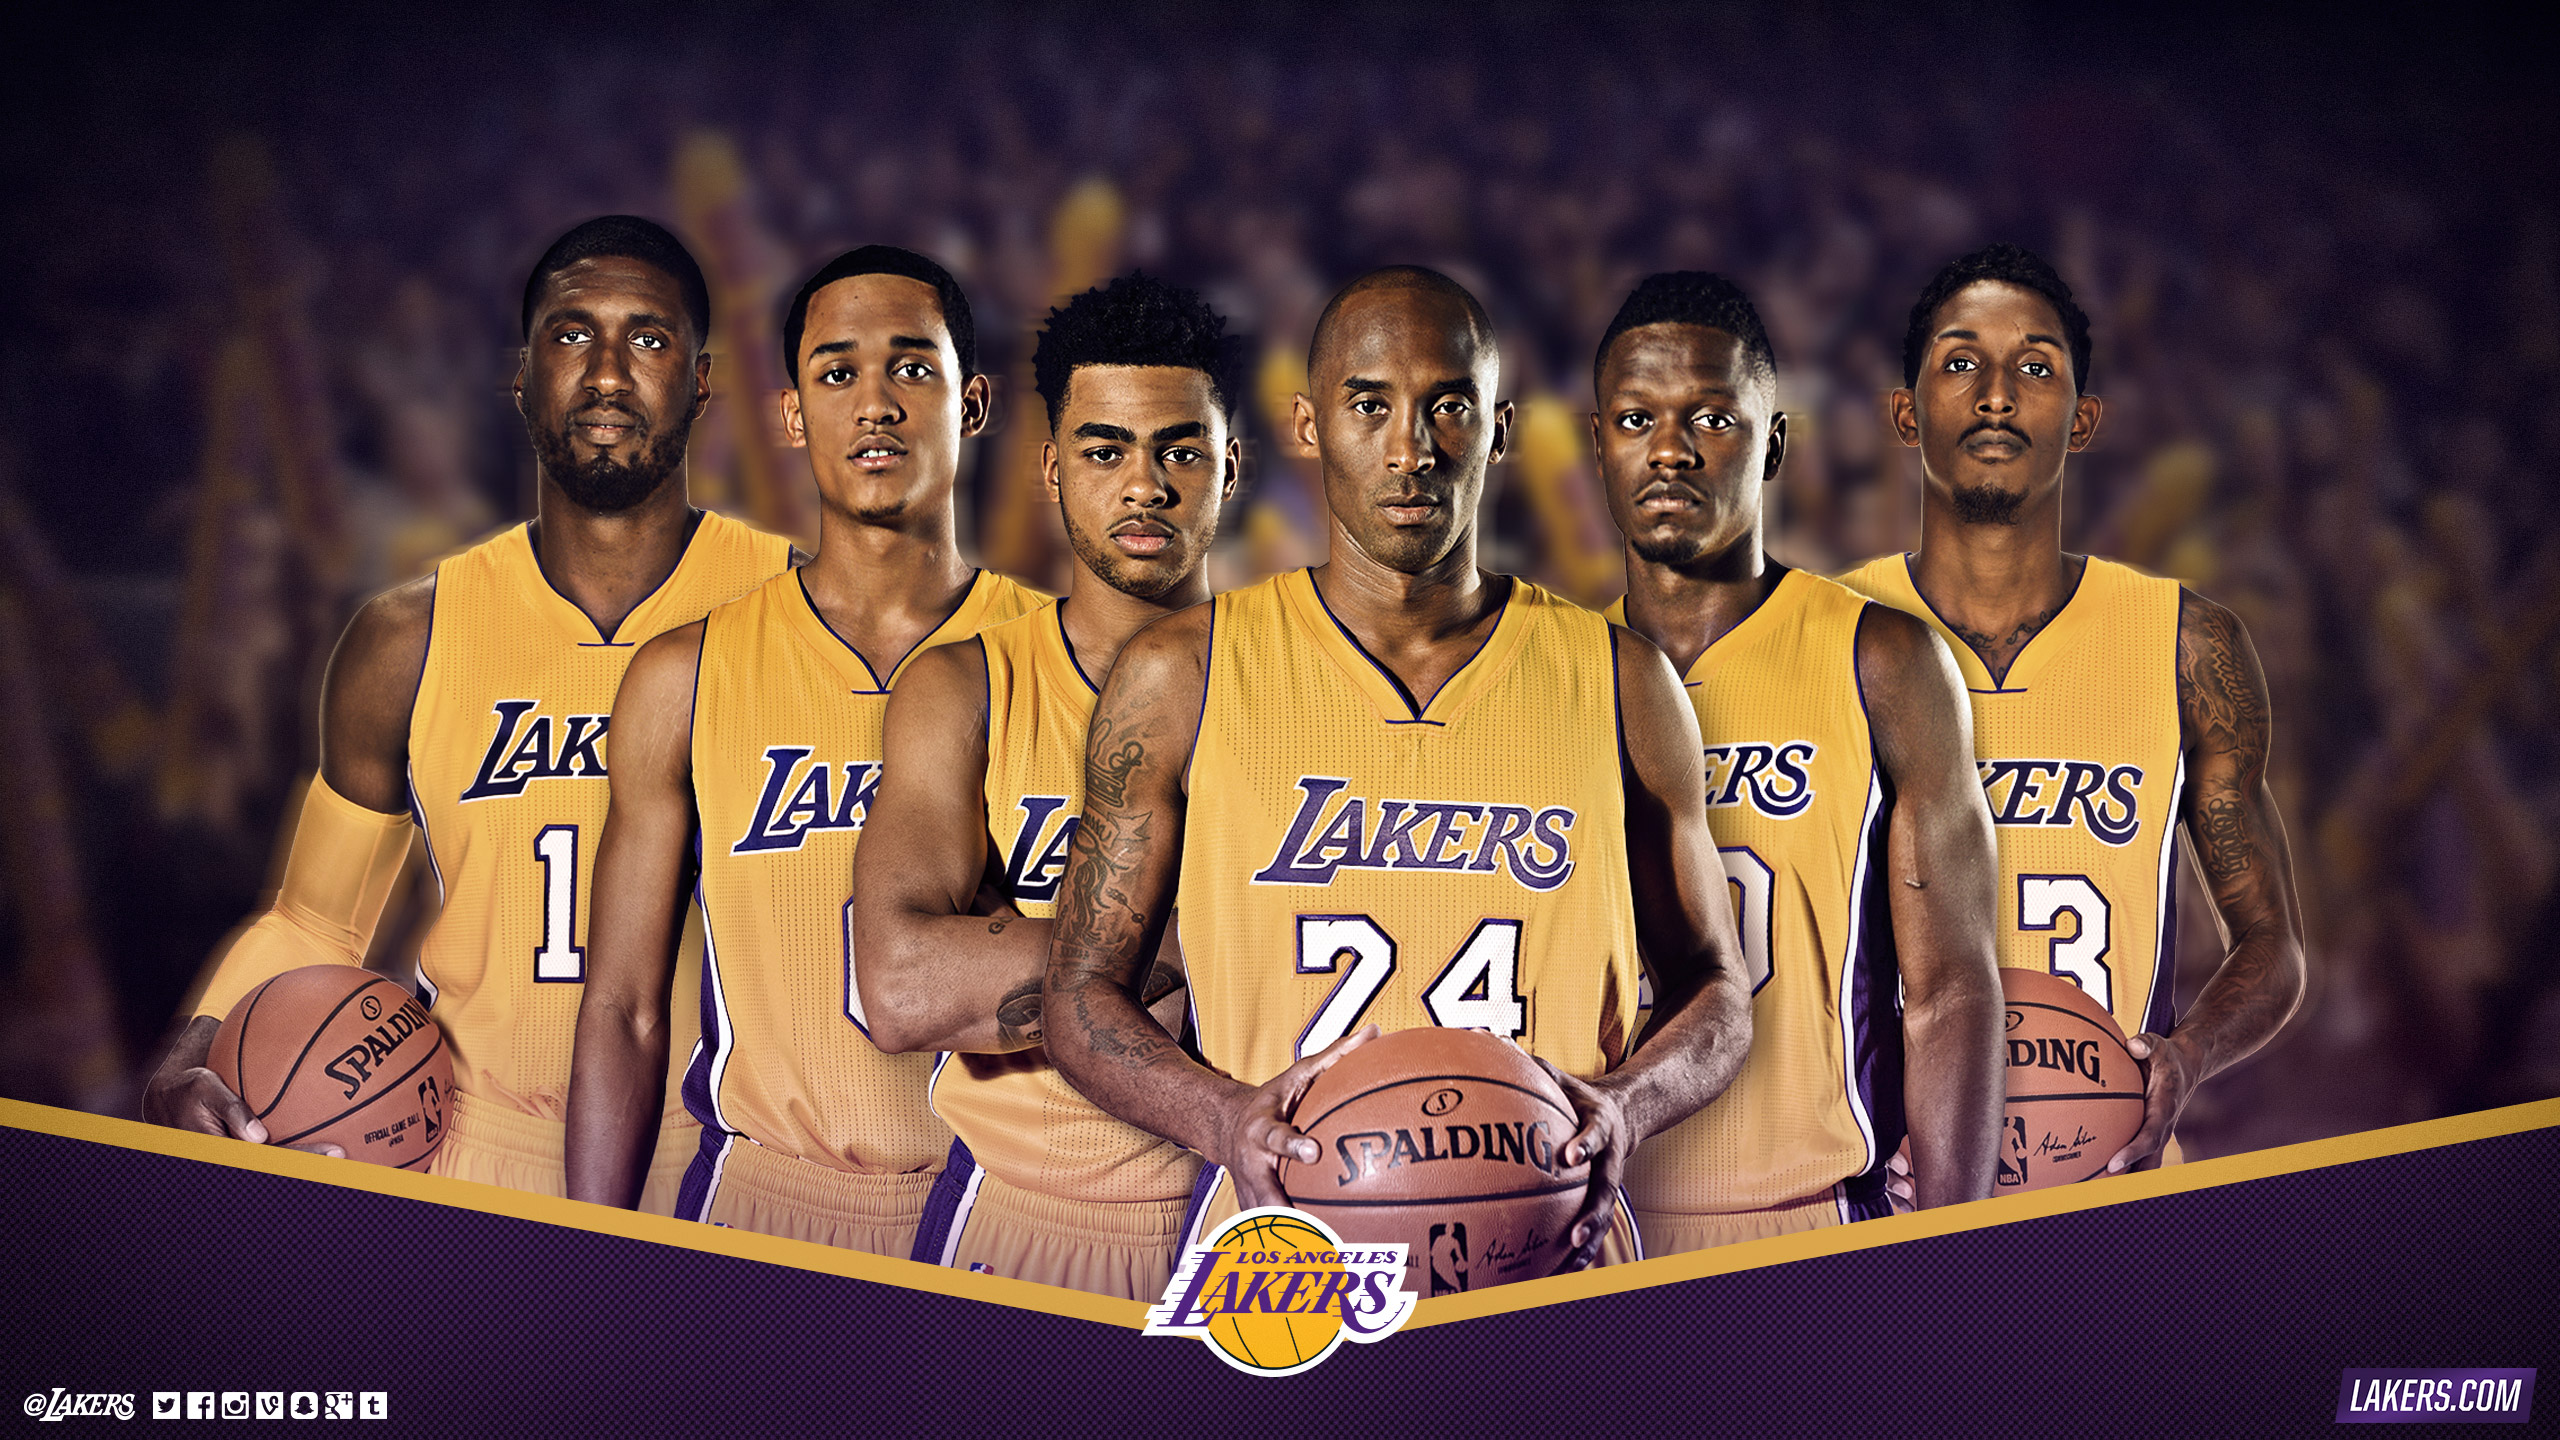 Free download lakers wallpapers and infographics los angeles lakers x for your desktop mobile tablet explore lakers wallpaper lakers championship wallpaper free lakers wallpaper lakers wallpapers